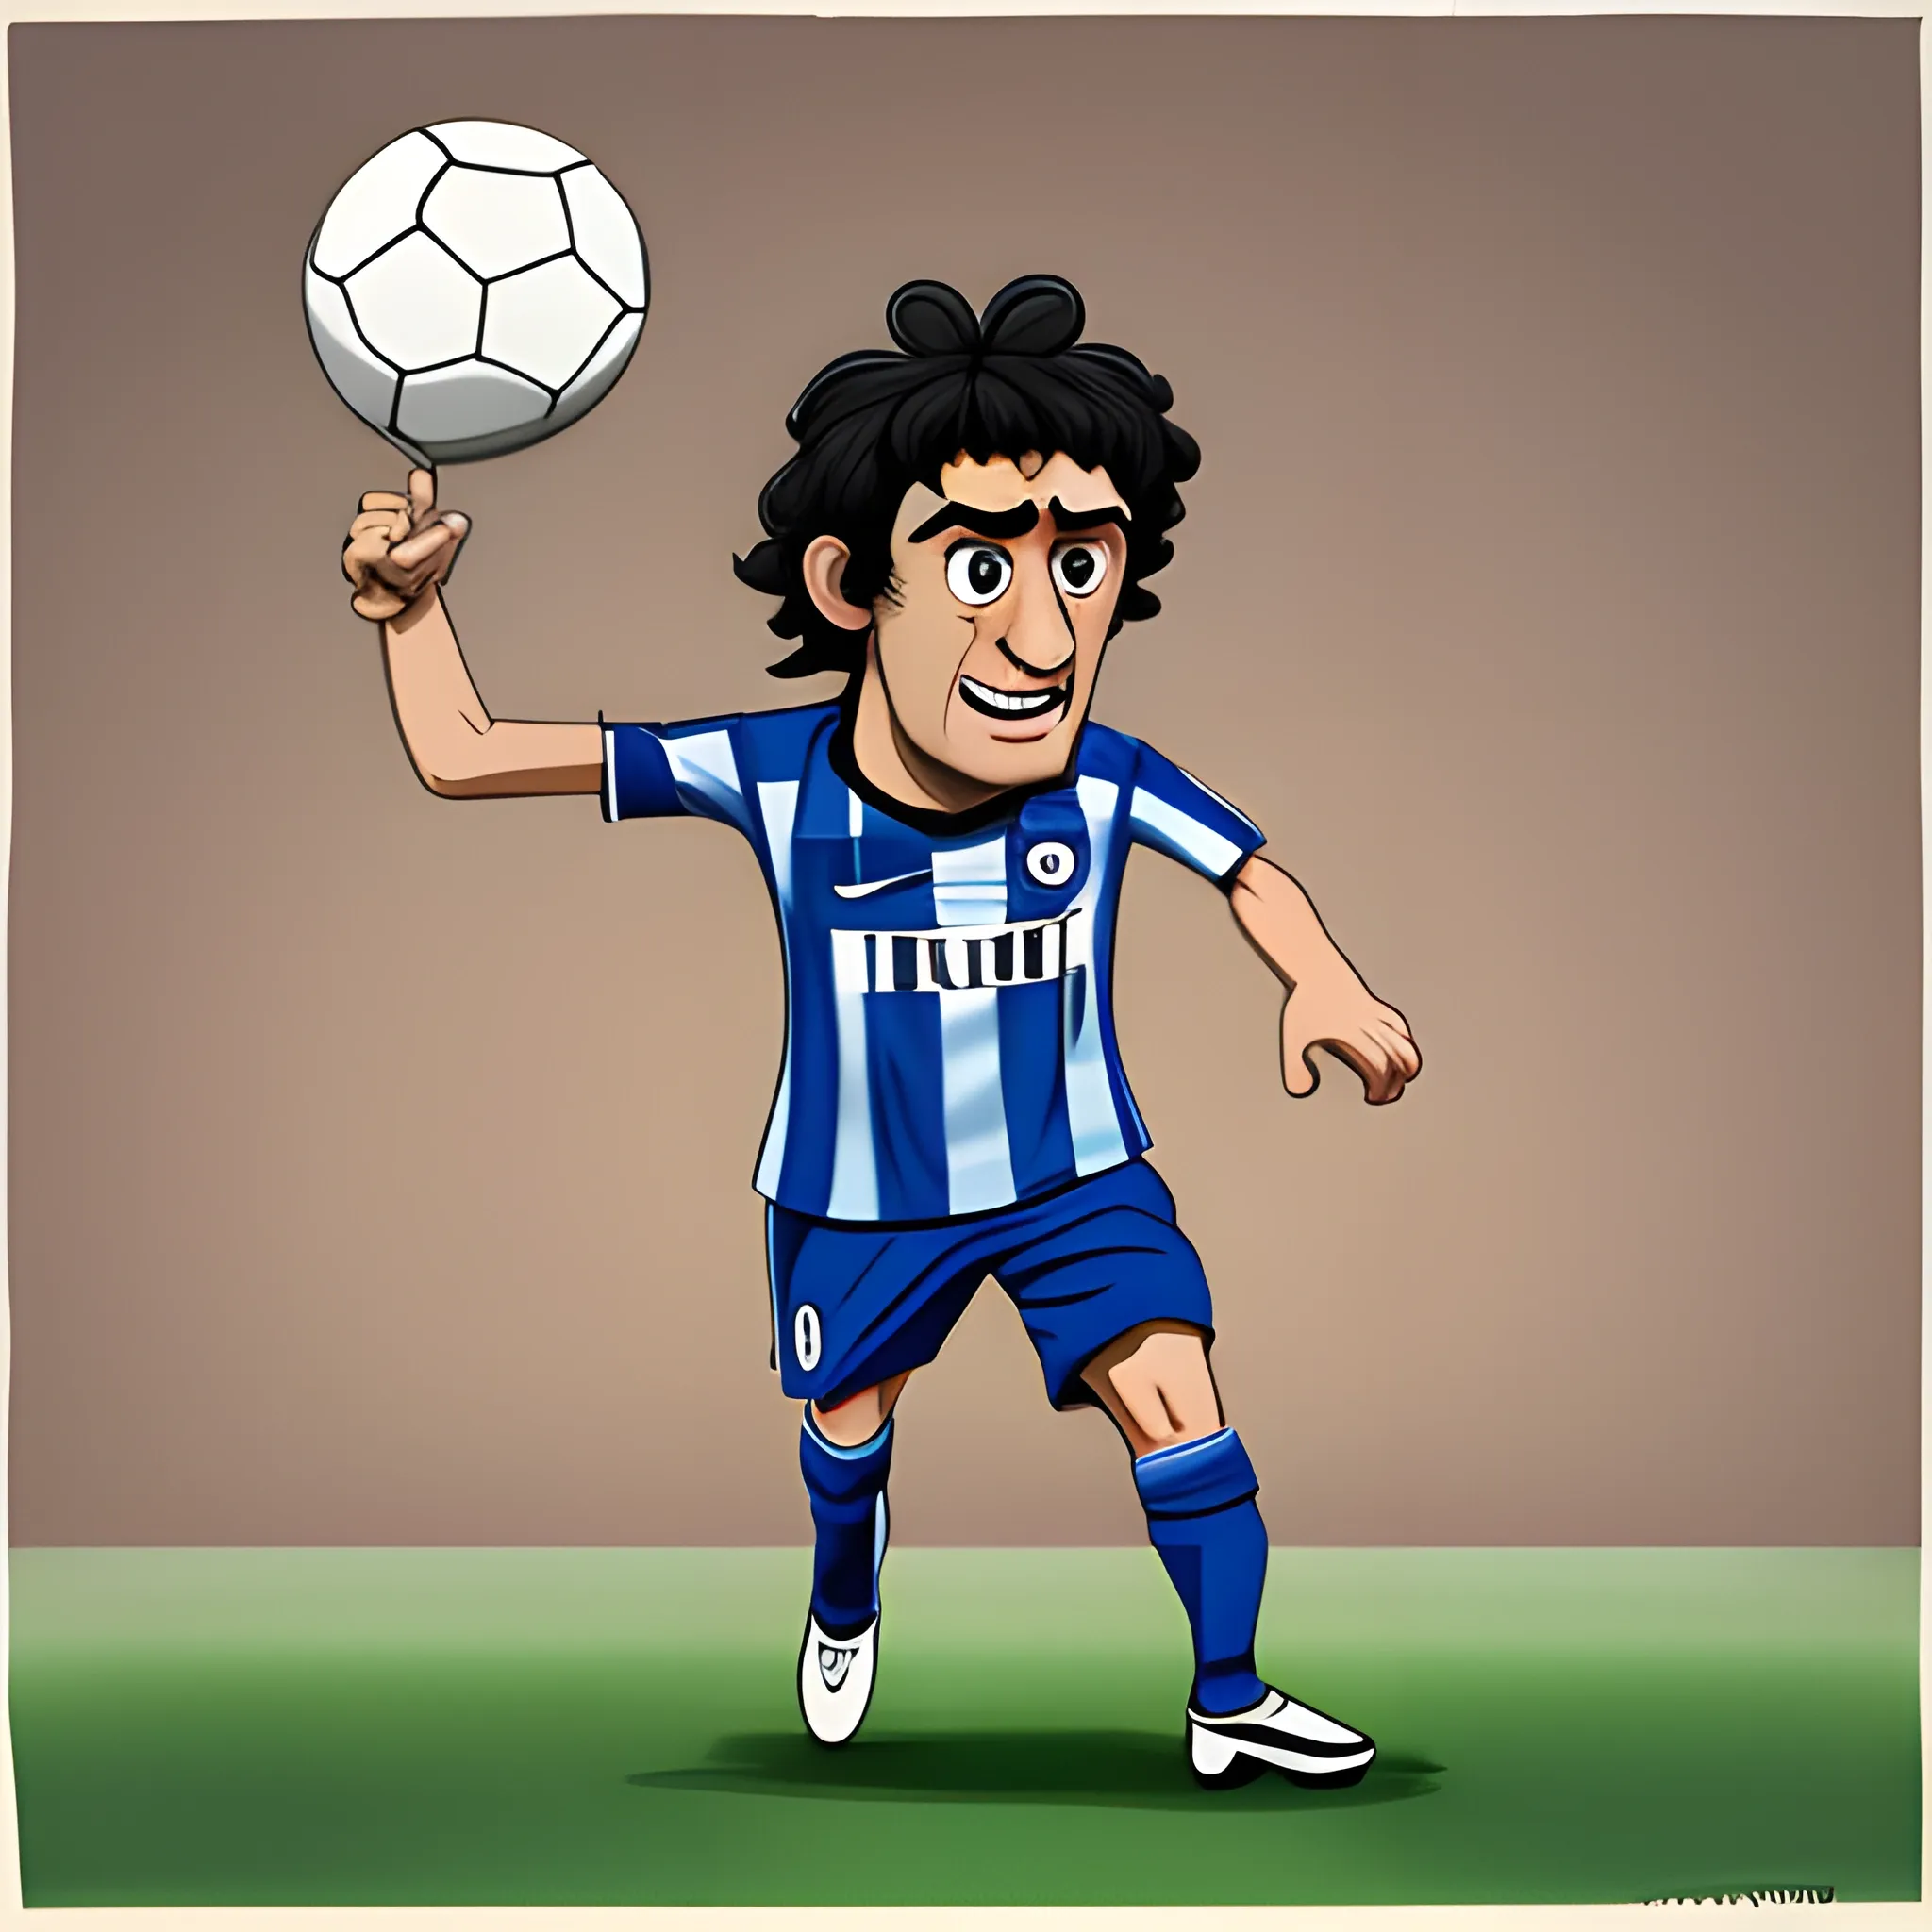 Character, soccer ballon, Diego Milito face. Toon style